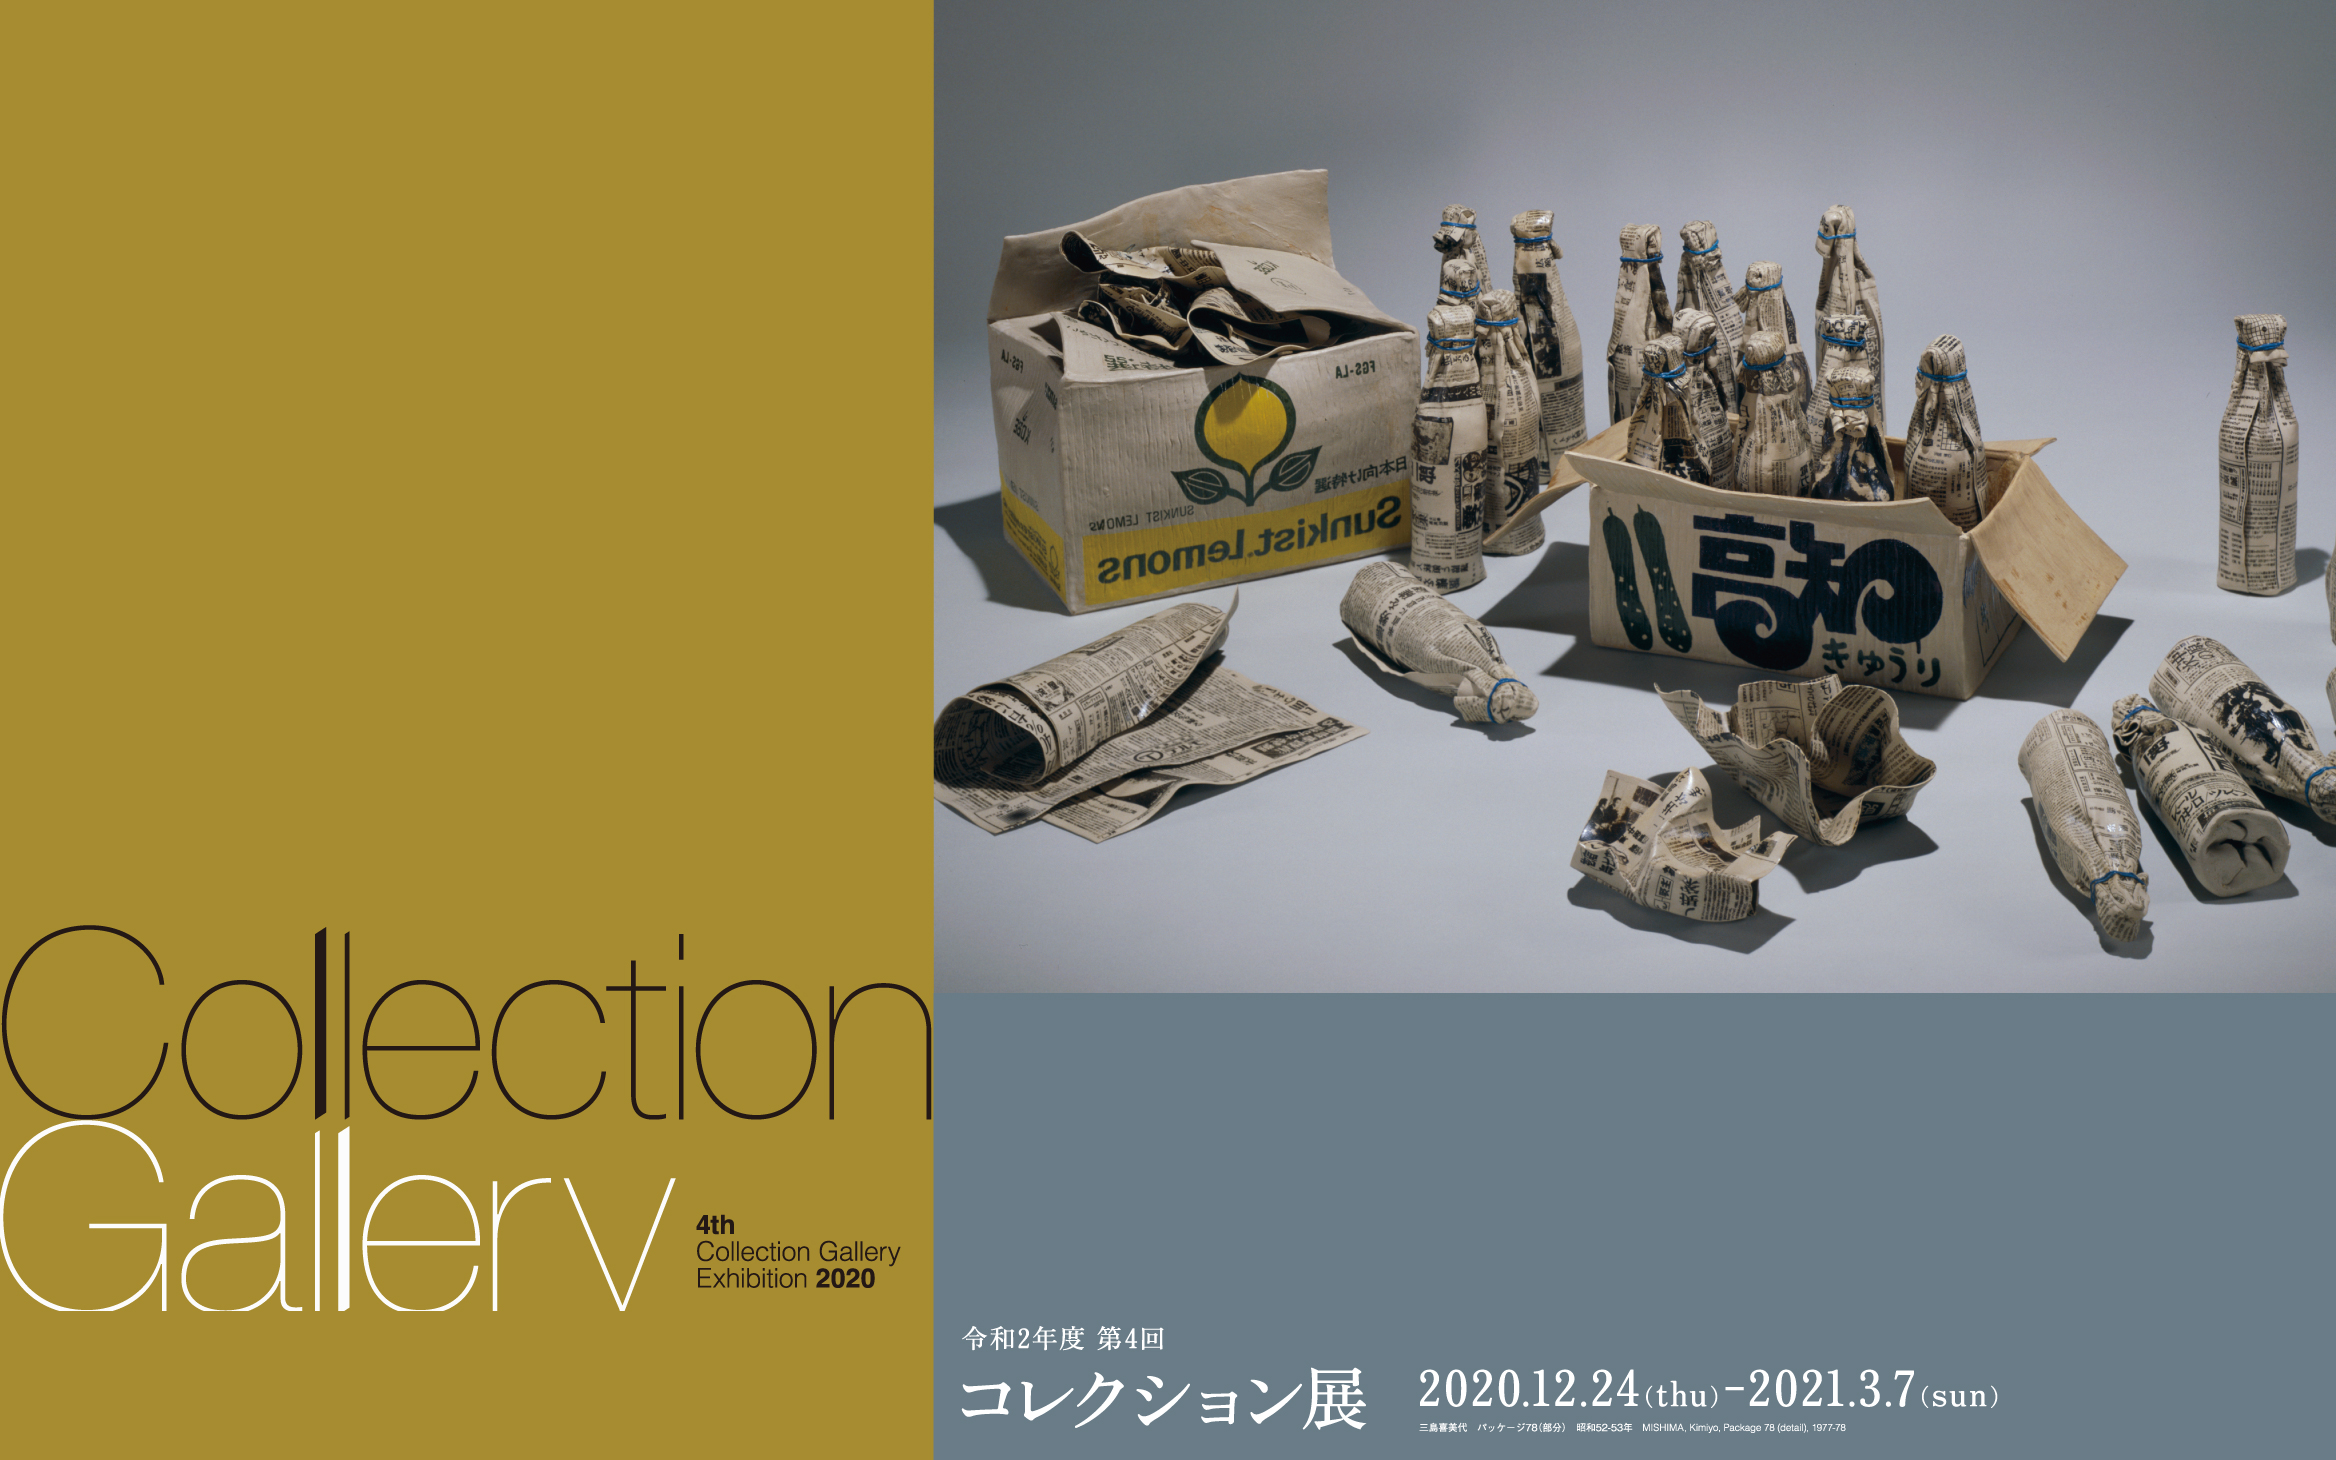 4th Collection Gallery Exhibition 2020–2021